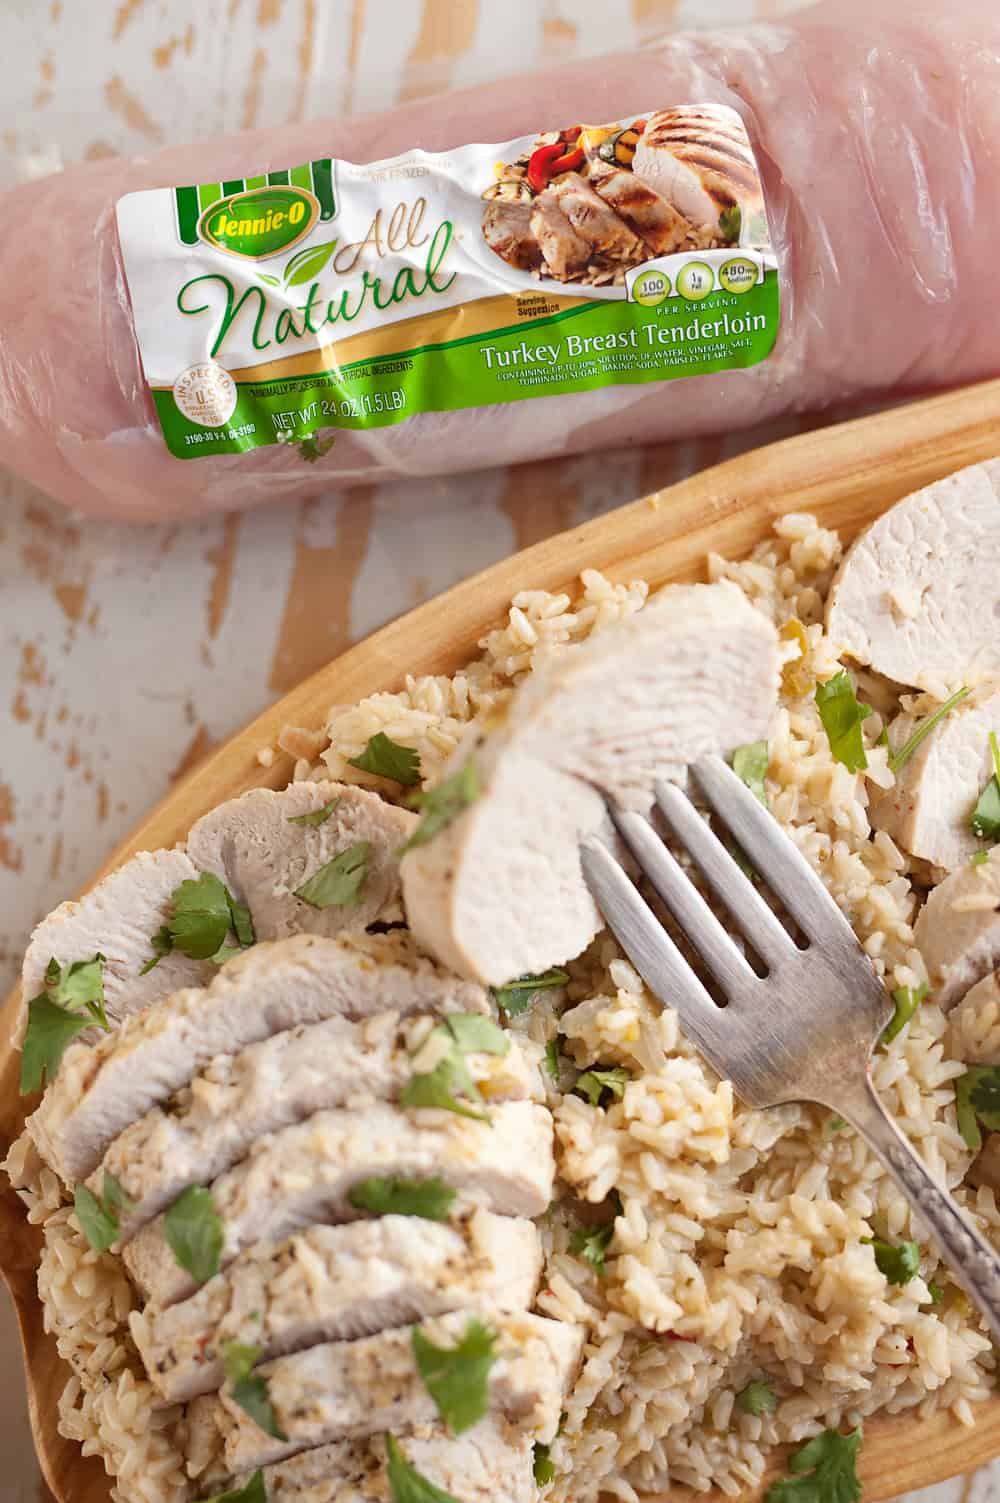 Pressure Cooker Turkey Verde & Rice is an easy 30 minute recipe made in your Instant Pot with only five ingredients! This healthy dinner idea is loaded with turkey tenderloins, salsa verde and brown rice for a quick and delicious meal you will love. 